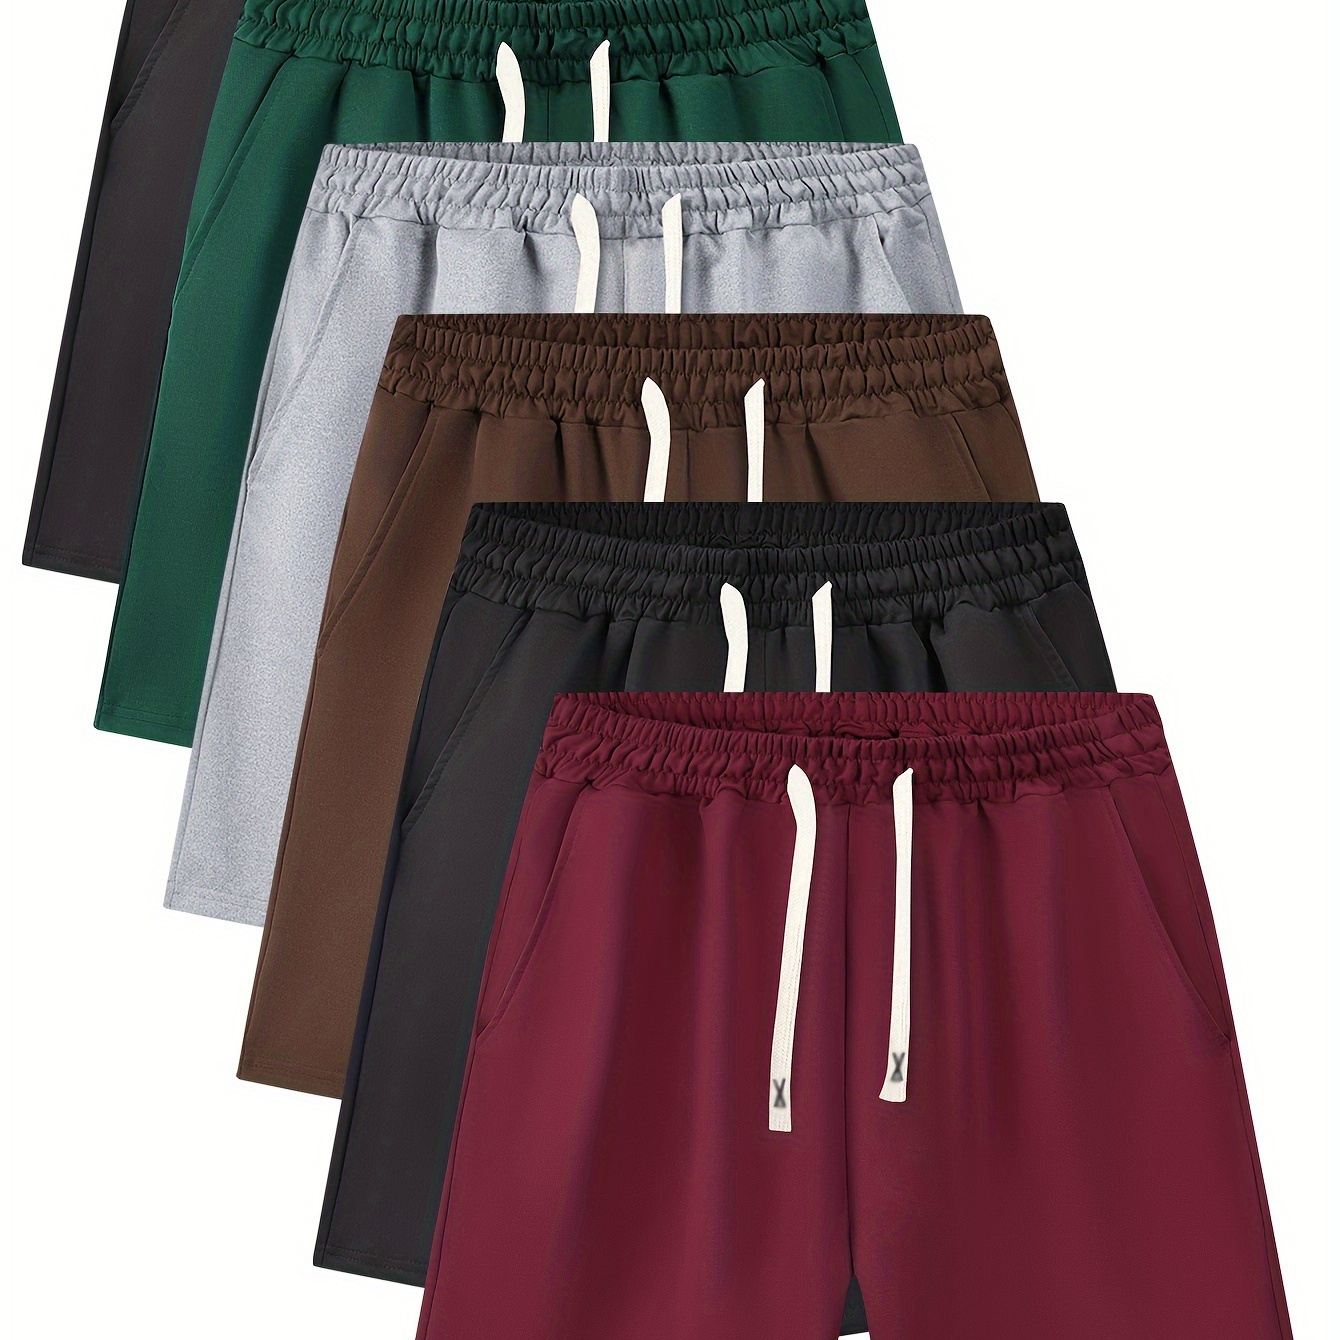 

6pcs Men's Casual Simple Solid Color Active Shorts, Chic Drawstring Beach Shorts For Summer